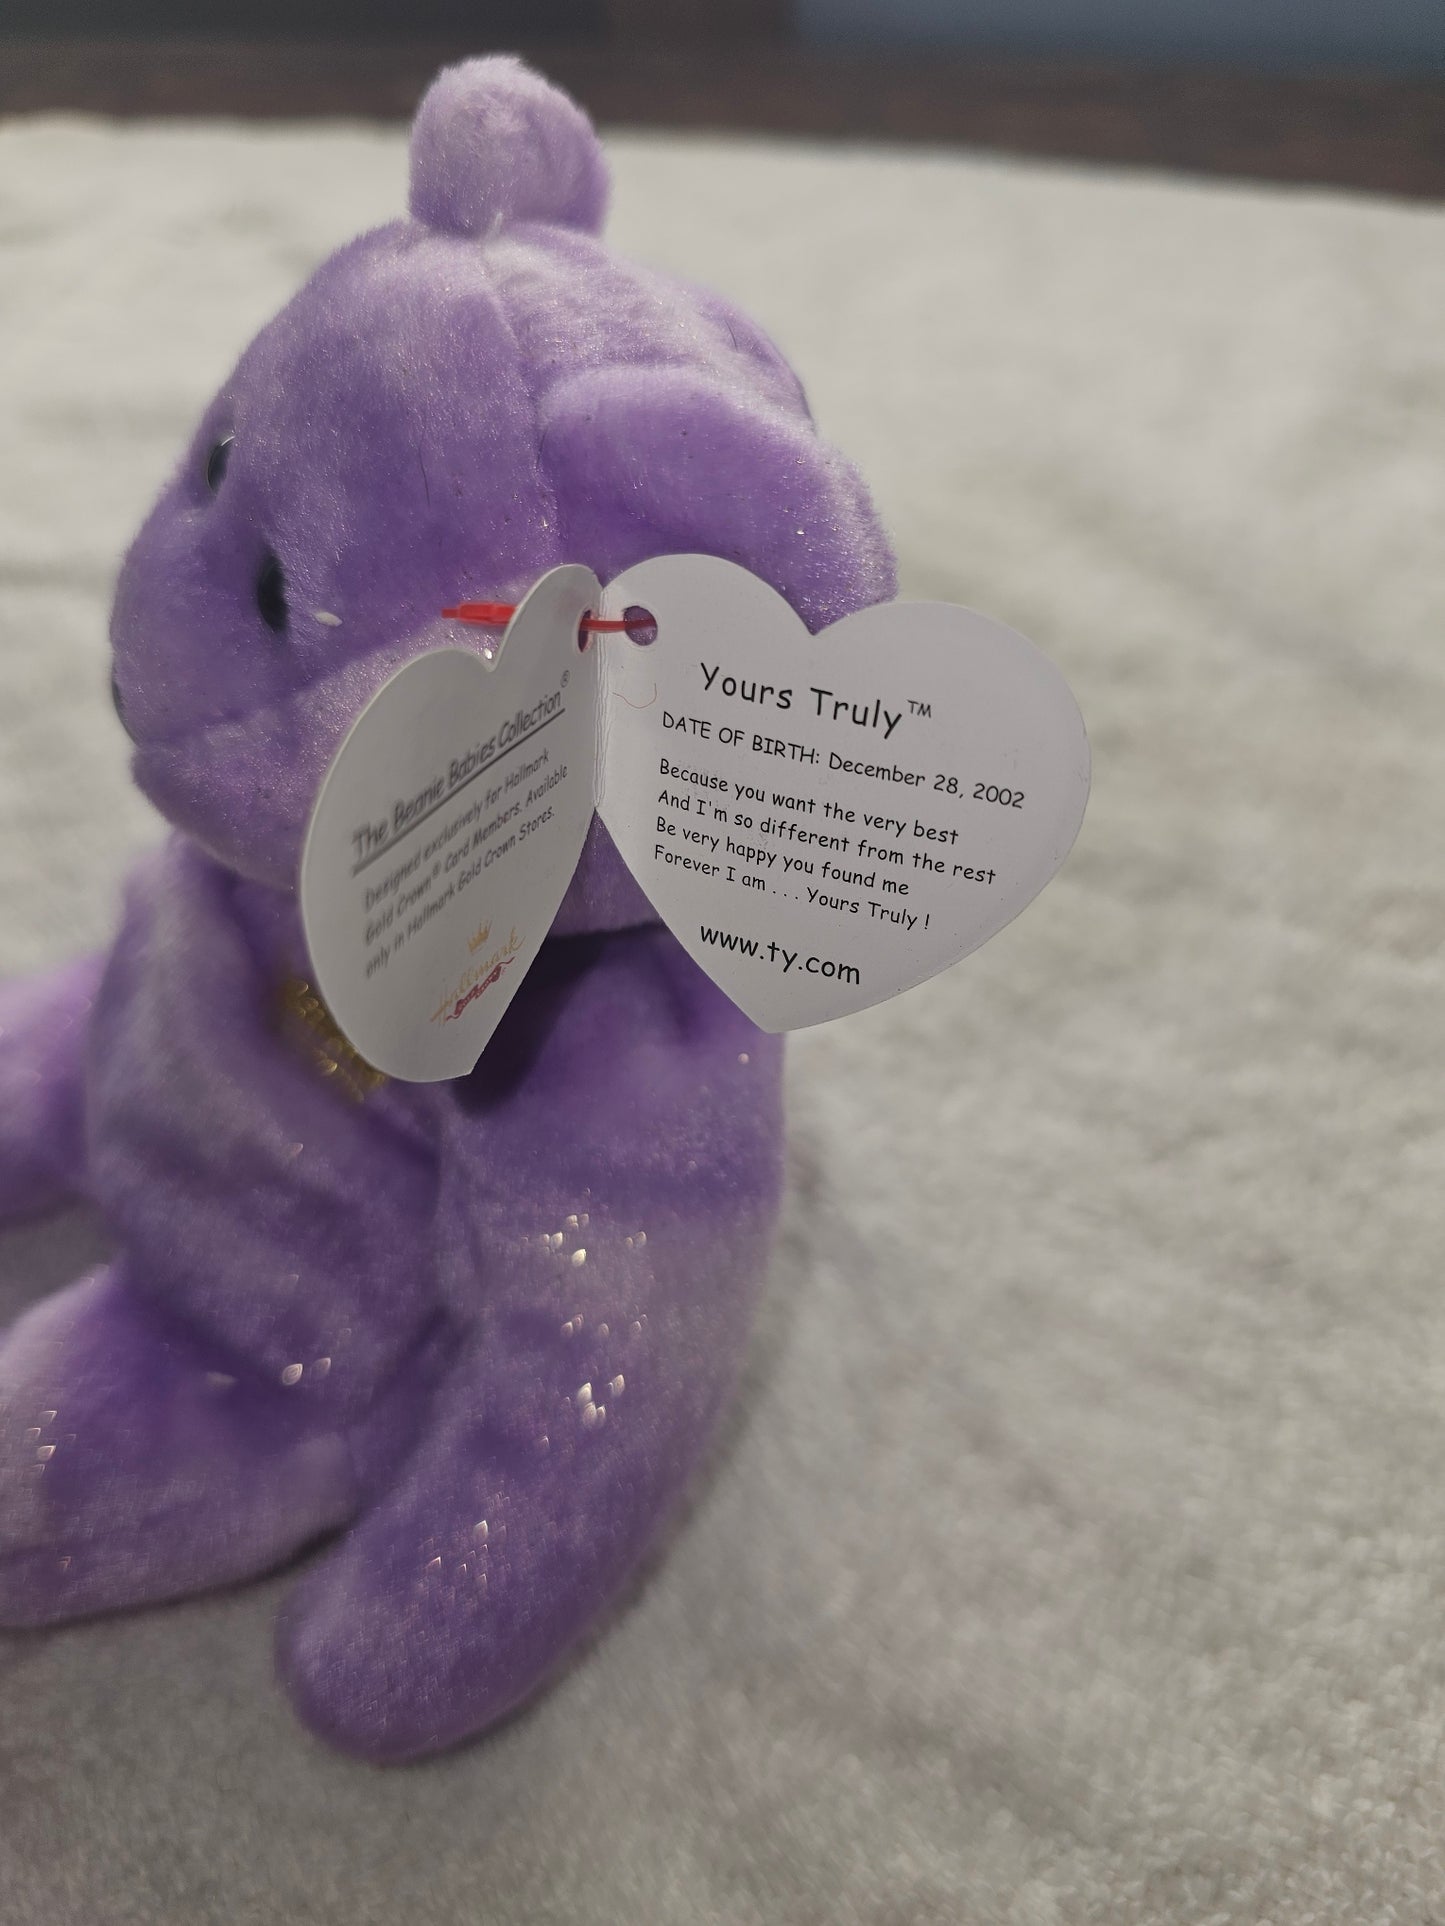 ty Beanie Baby: Yours Truly the Bear